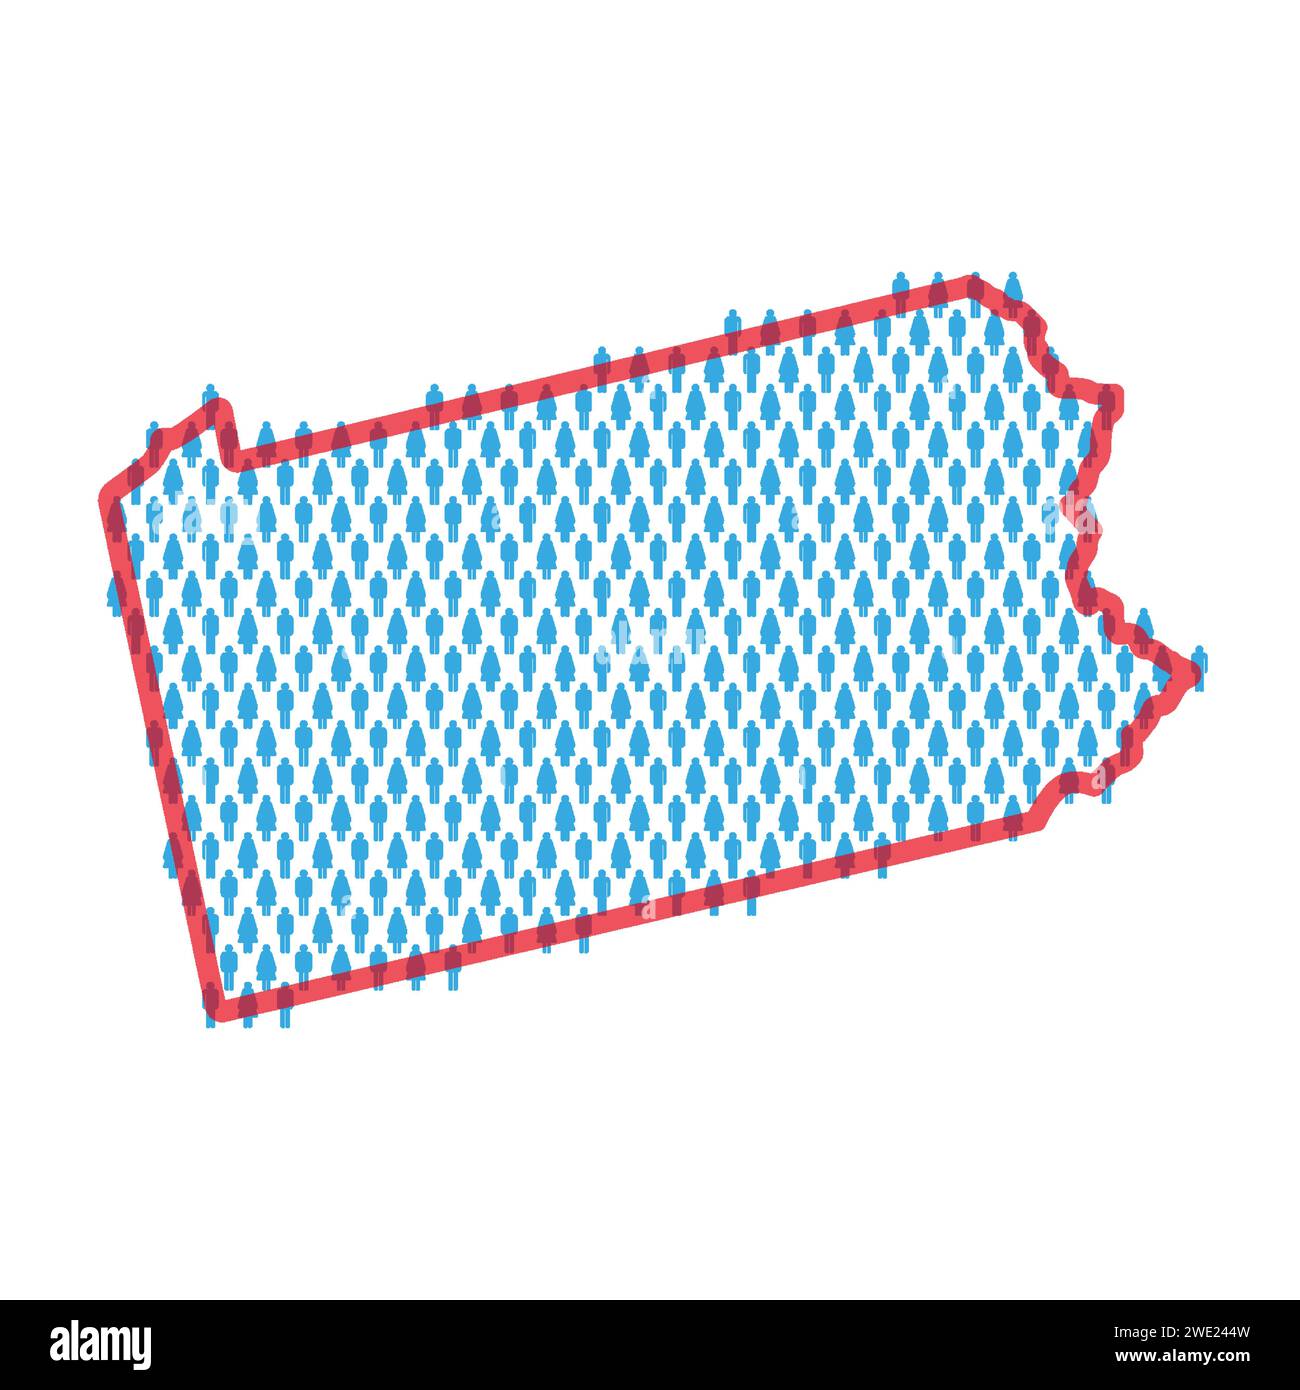 Pennsylvania population map. Stick figures people map with bold red translucent state border. Pattern of men and women icons. Isolated vector illustra Stock Vector